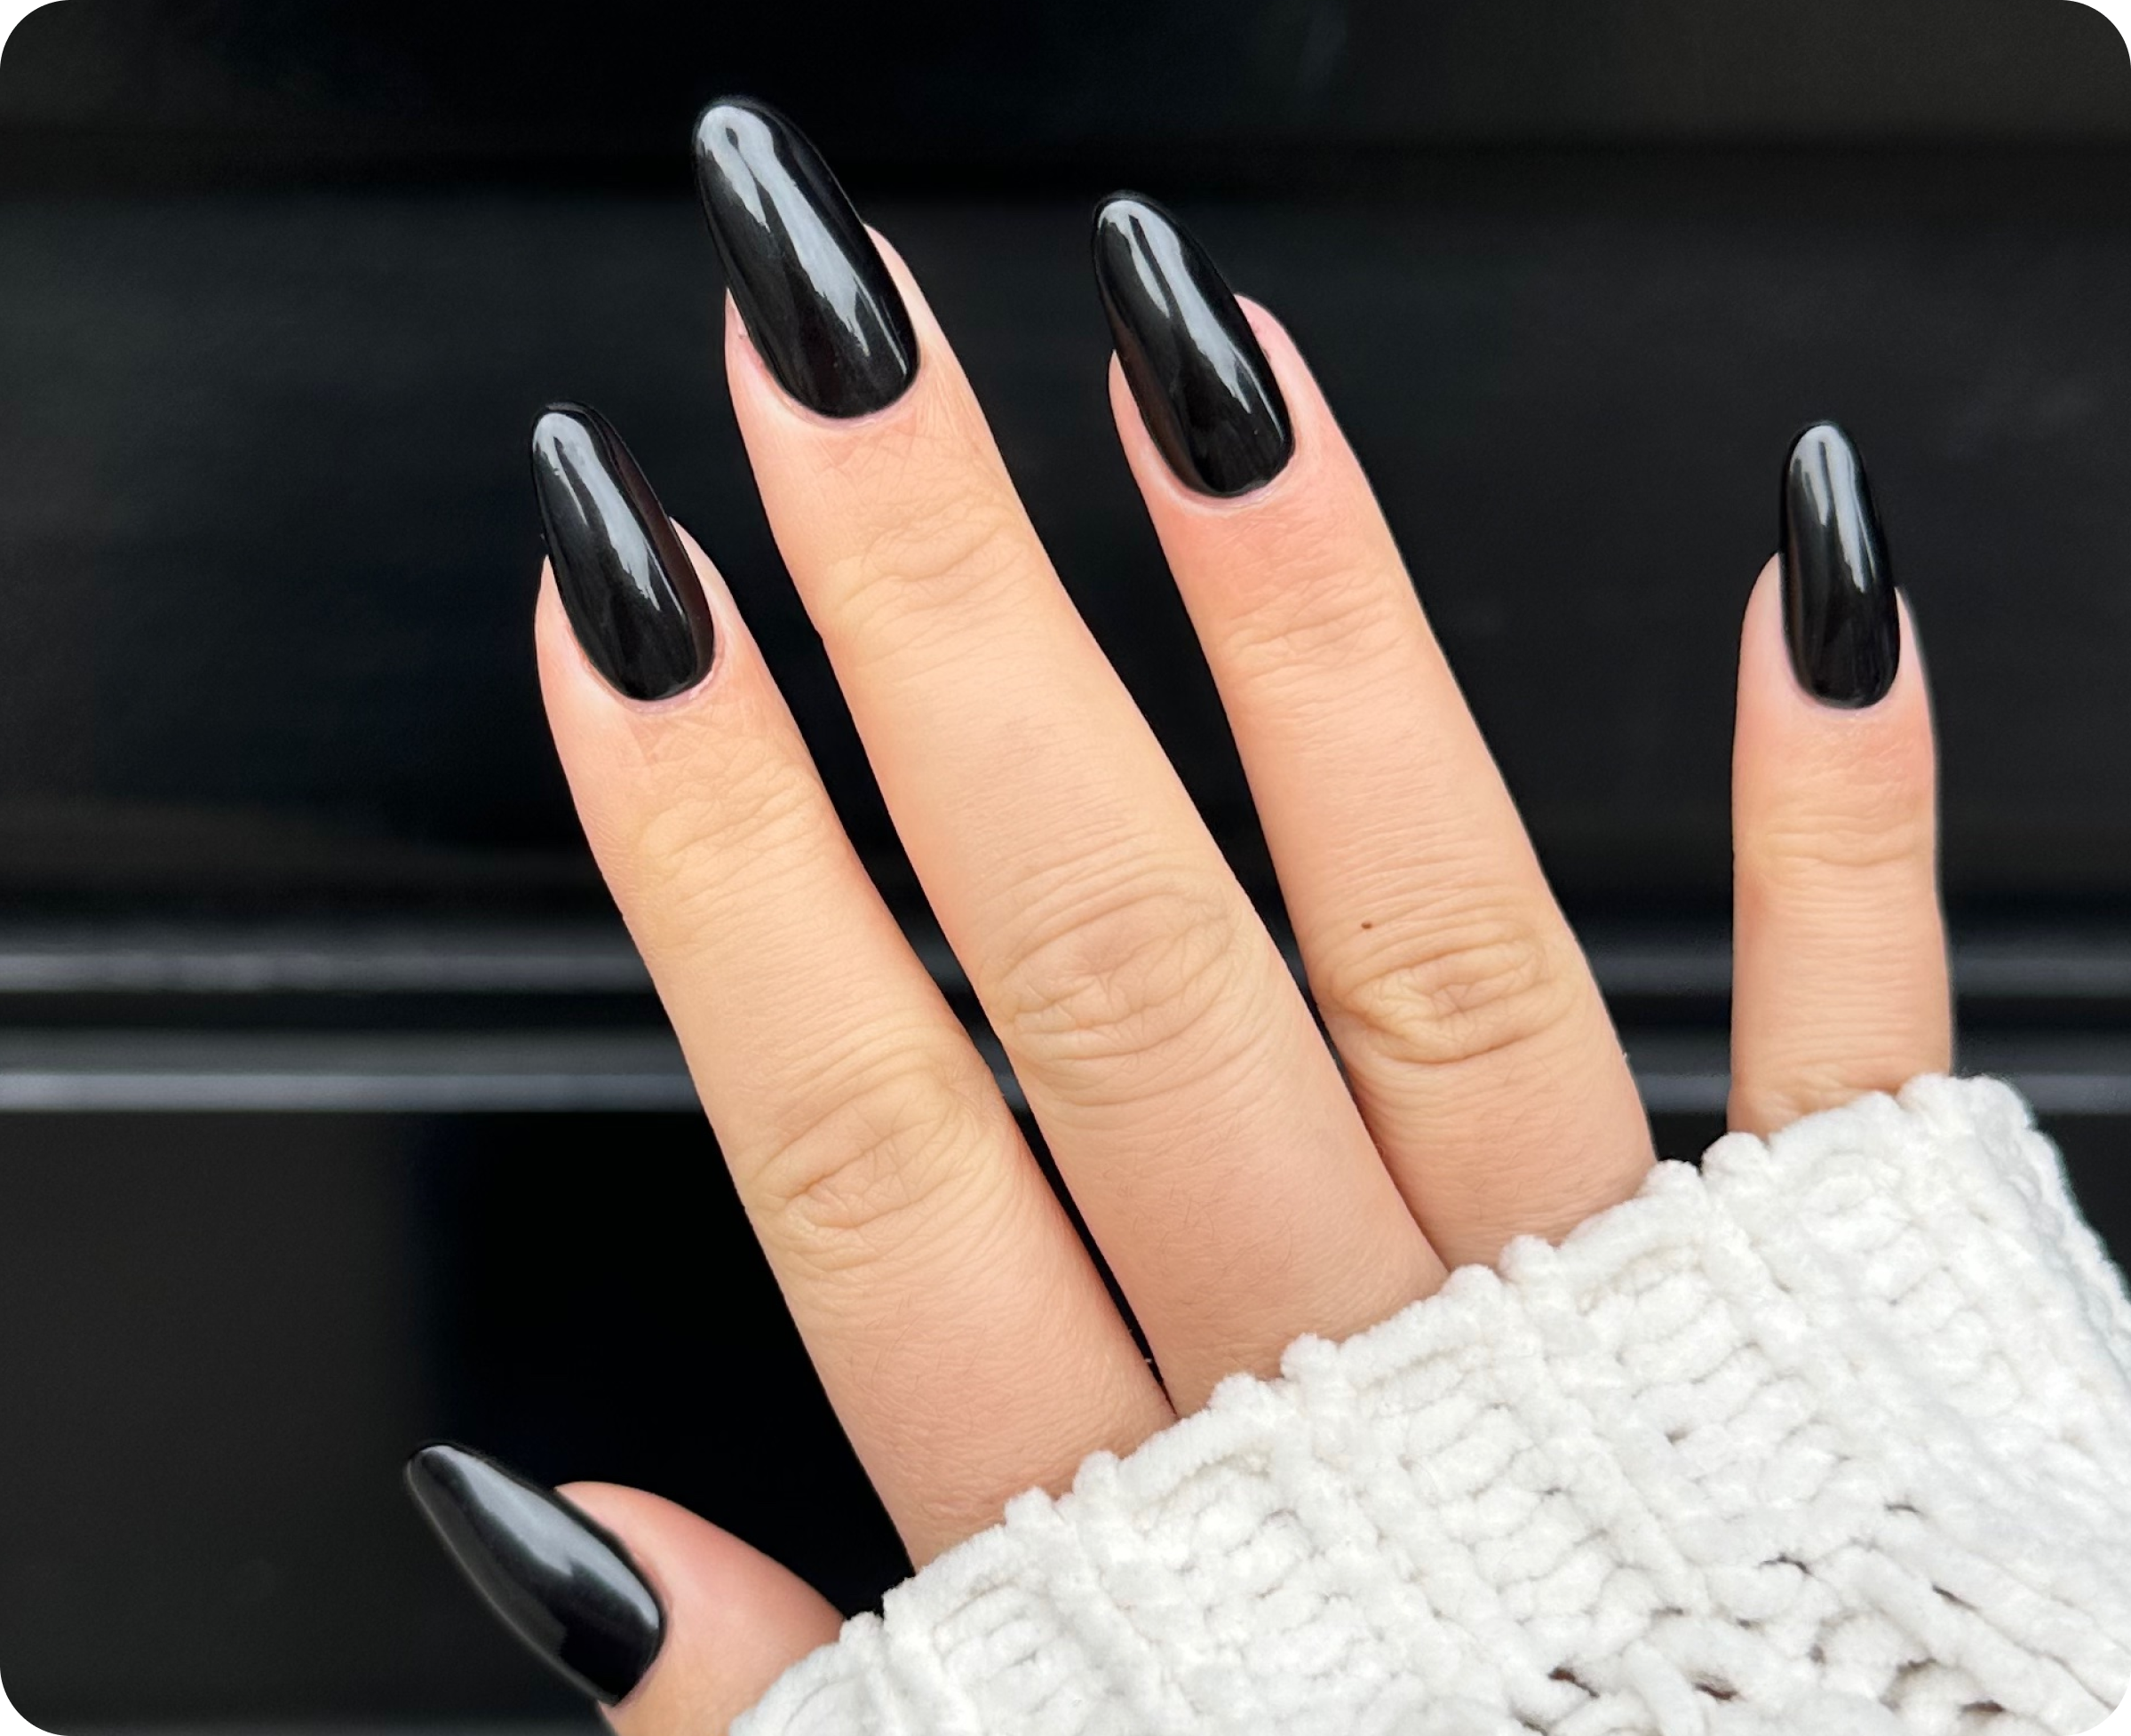 Where to Get the Best Nail Art in and Around Denver - 5280